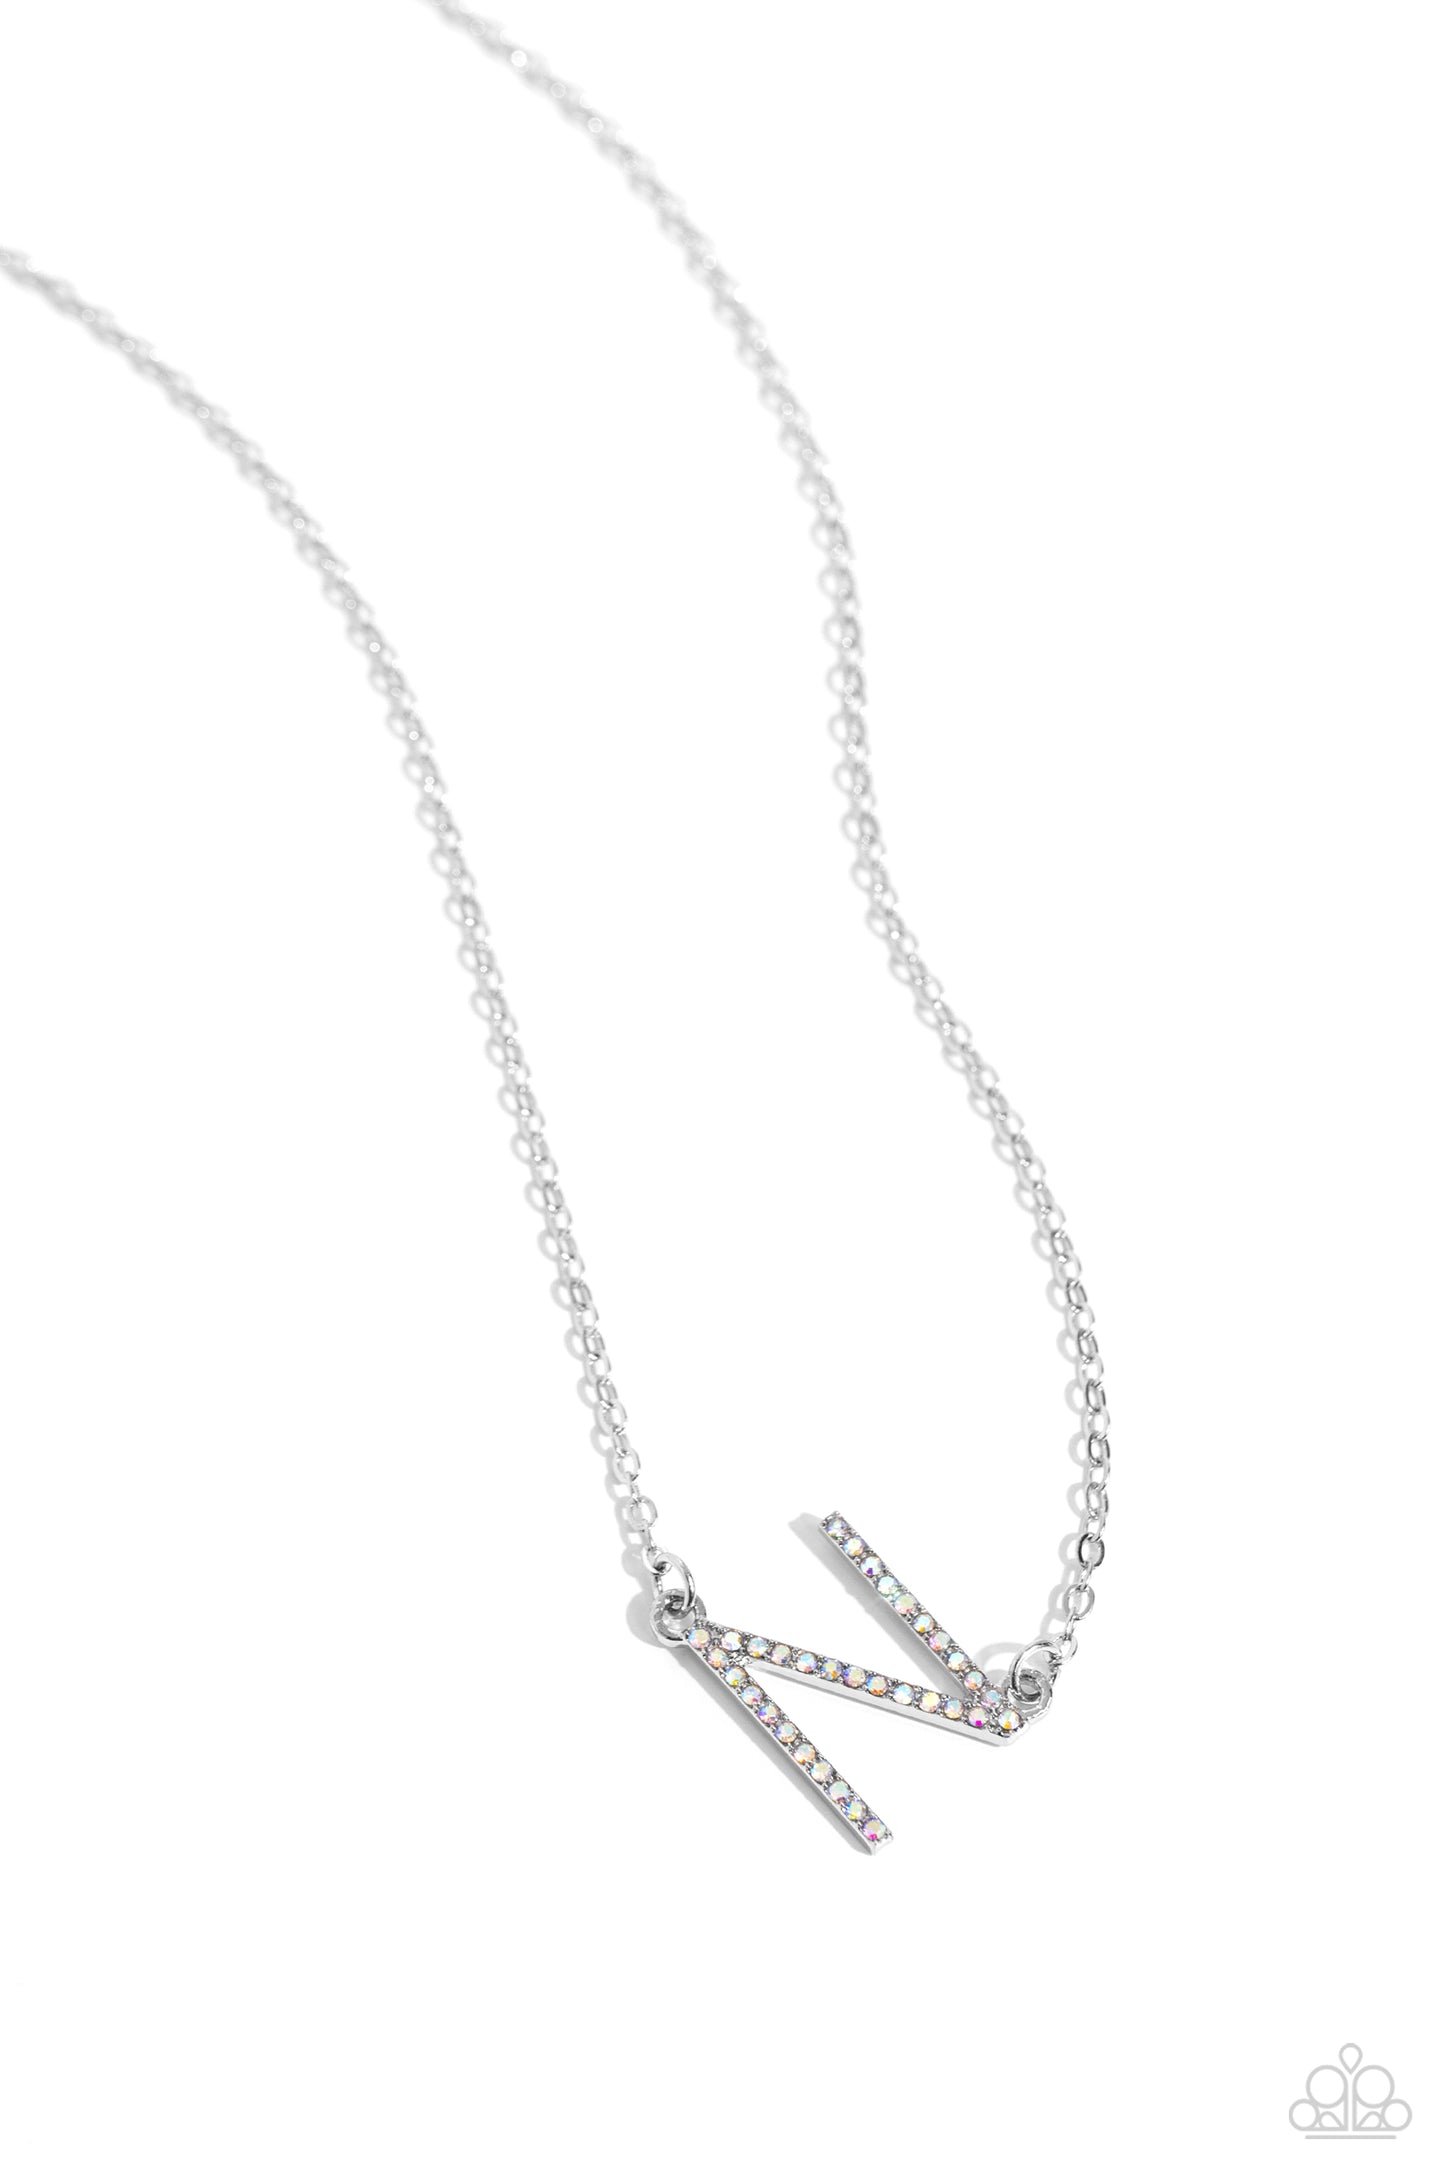 INITIALLY Yours Multi "N" Necklace - Paparazzi Accessories  Embossed with dainty iridescent rhinestones, a silver letter "N" hovers below the collar from a dainty silver chain, for a sentimentally simple design. Features an adjustable clasp closure. Due to its prismatic palette, color may vary.  Sold as one individual necklace. Includes one pair of matching earrings.  P2DA-MTXX-137XX